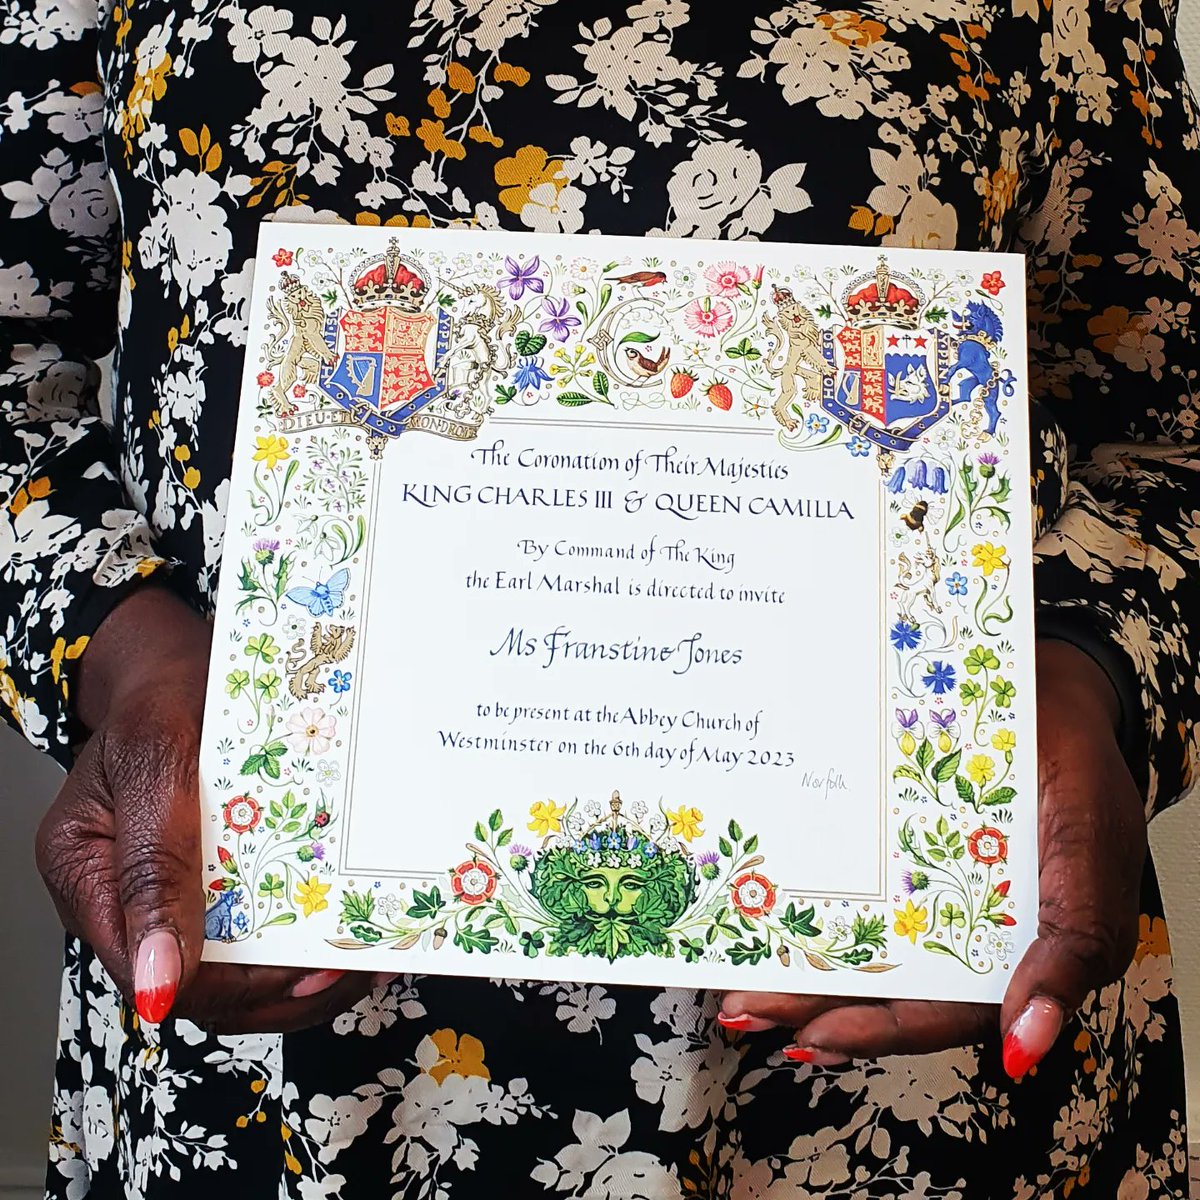 We're SO proud of our co-director, friend and our Queen @Franstine_Jones BEM, who is off to the #Coronation this Saturday! She's one of the few recipients of the British Empire Medallion (BEM) for voluntary work to be invited. She uses her BEM to raise awareness of her D&I work